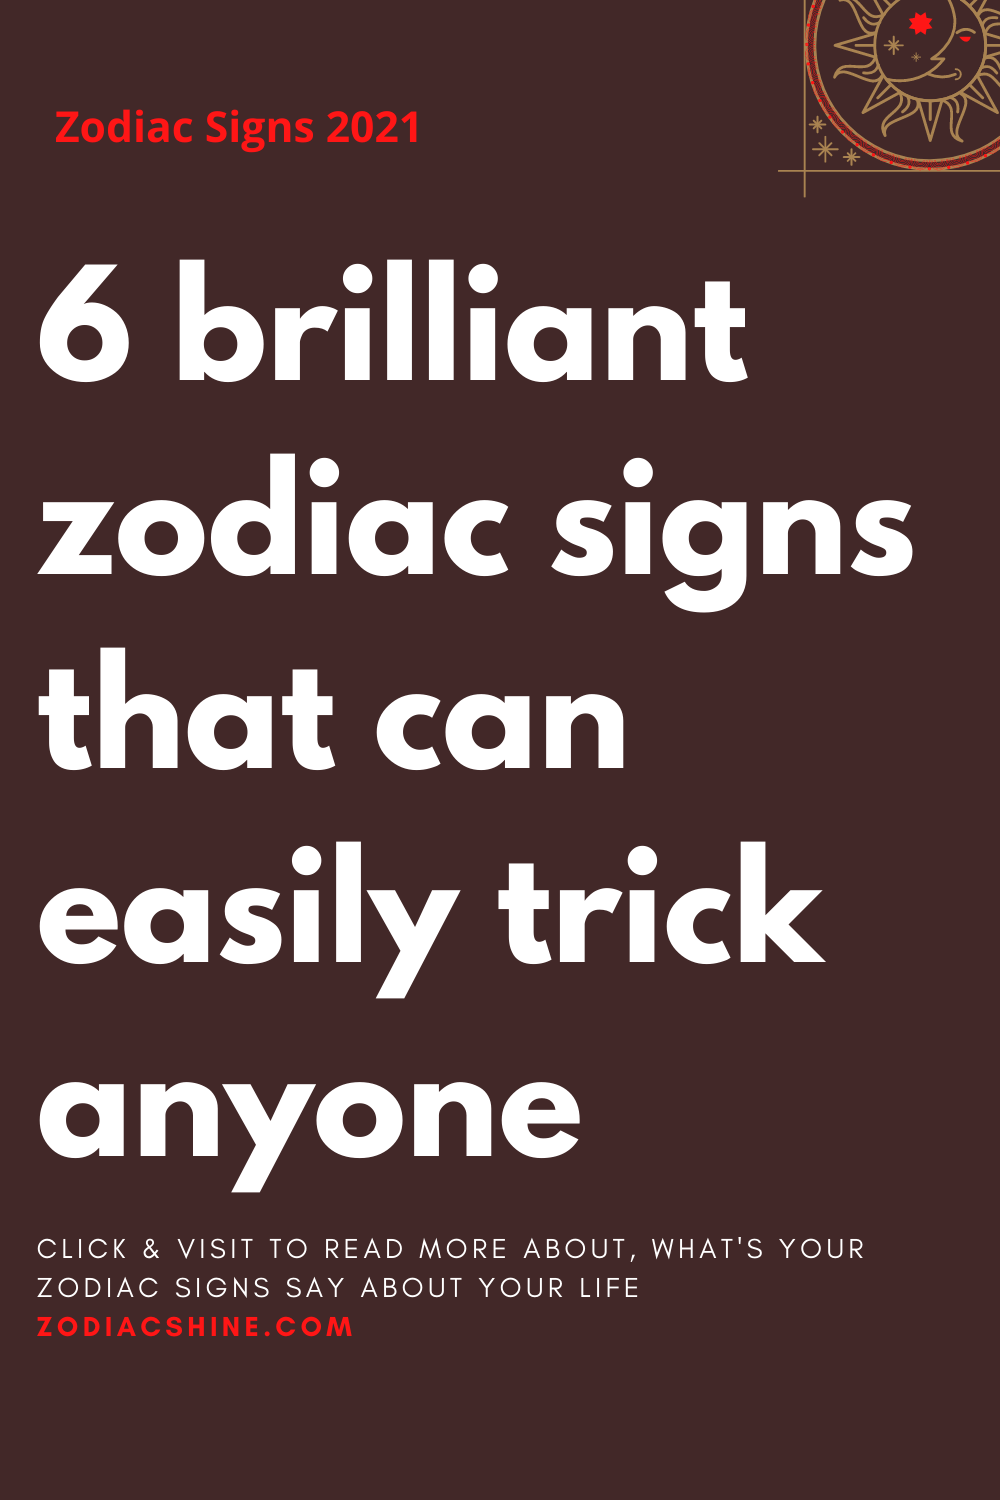 6 brilliant zodiac signs that can easily trick anyone